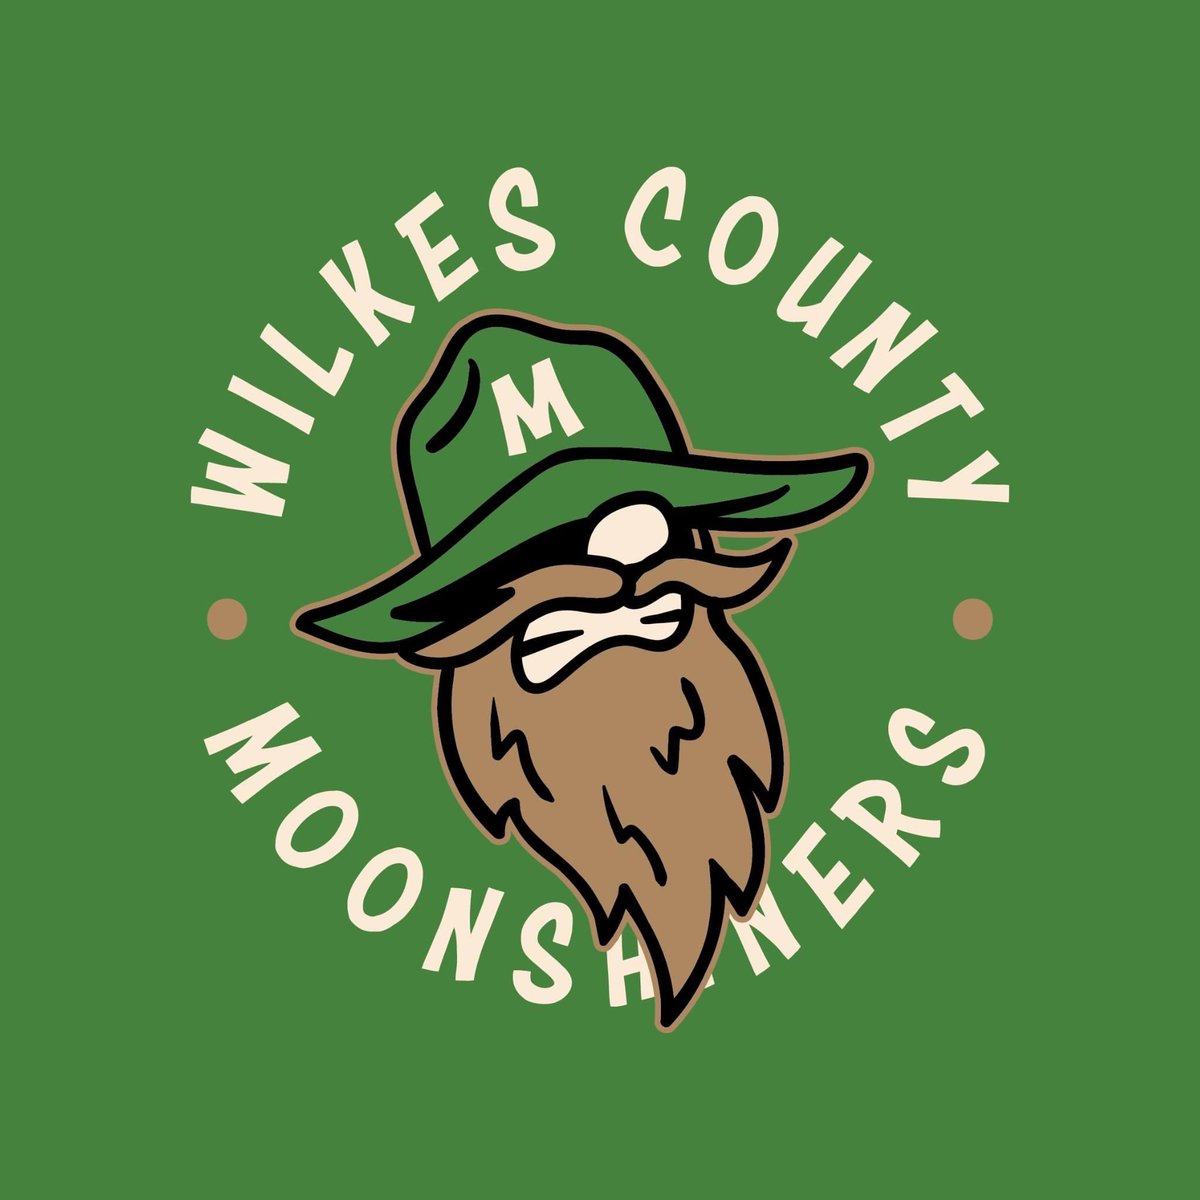 Old North State League baseball is coming to Wilkes County this summer! We are looking for college players! If you are interested in being a part of our inaugural roster or know someone who is looking, please reach out or visit: wilkescountymoonshiners.com wilkescountymoonshiners.com/player-registr…